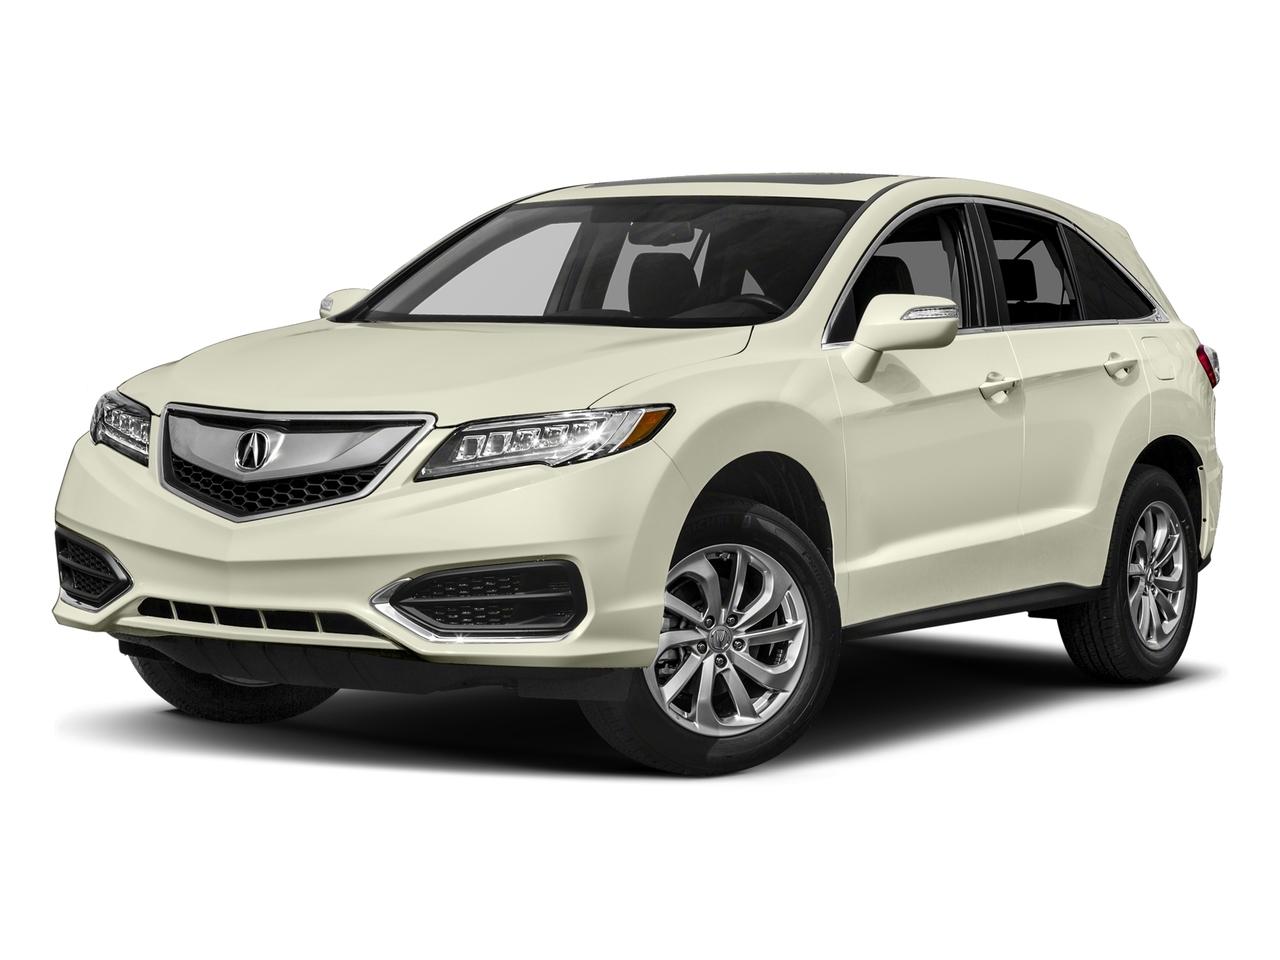 2017 Acura RDX Vehicle Photo in Willow Grove, PA 19090